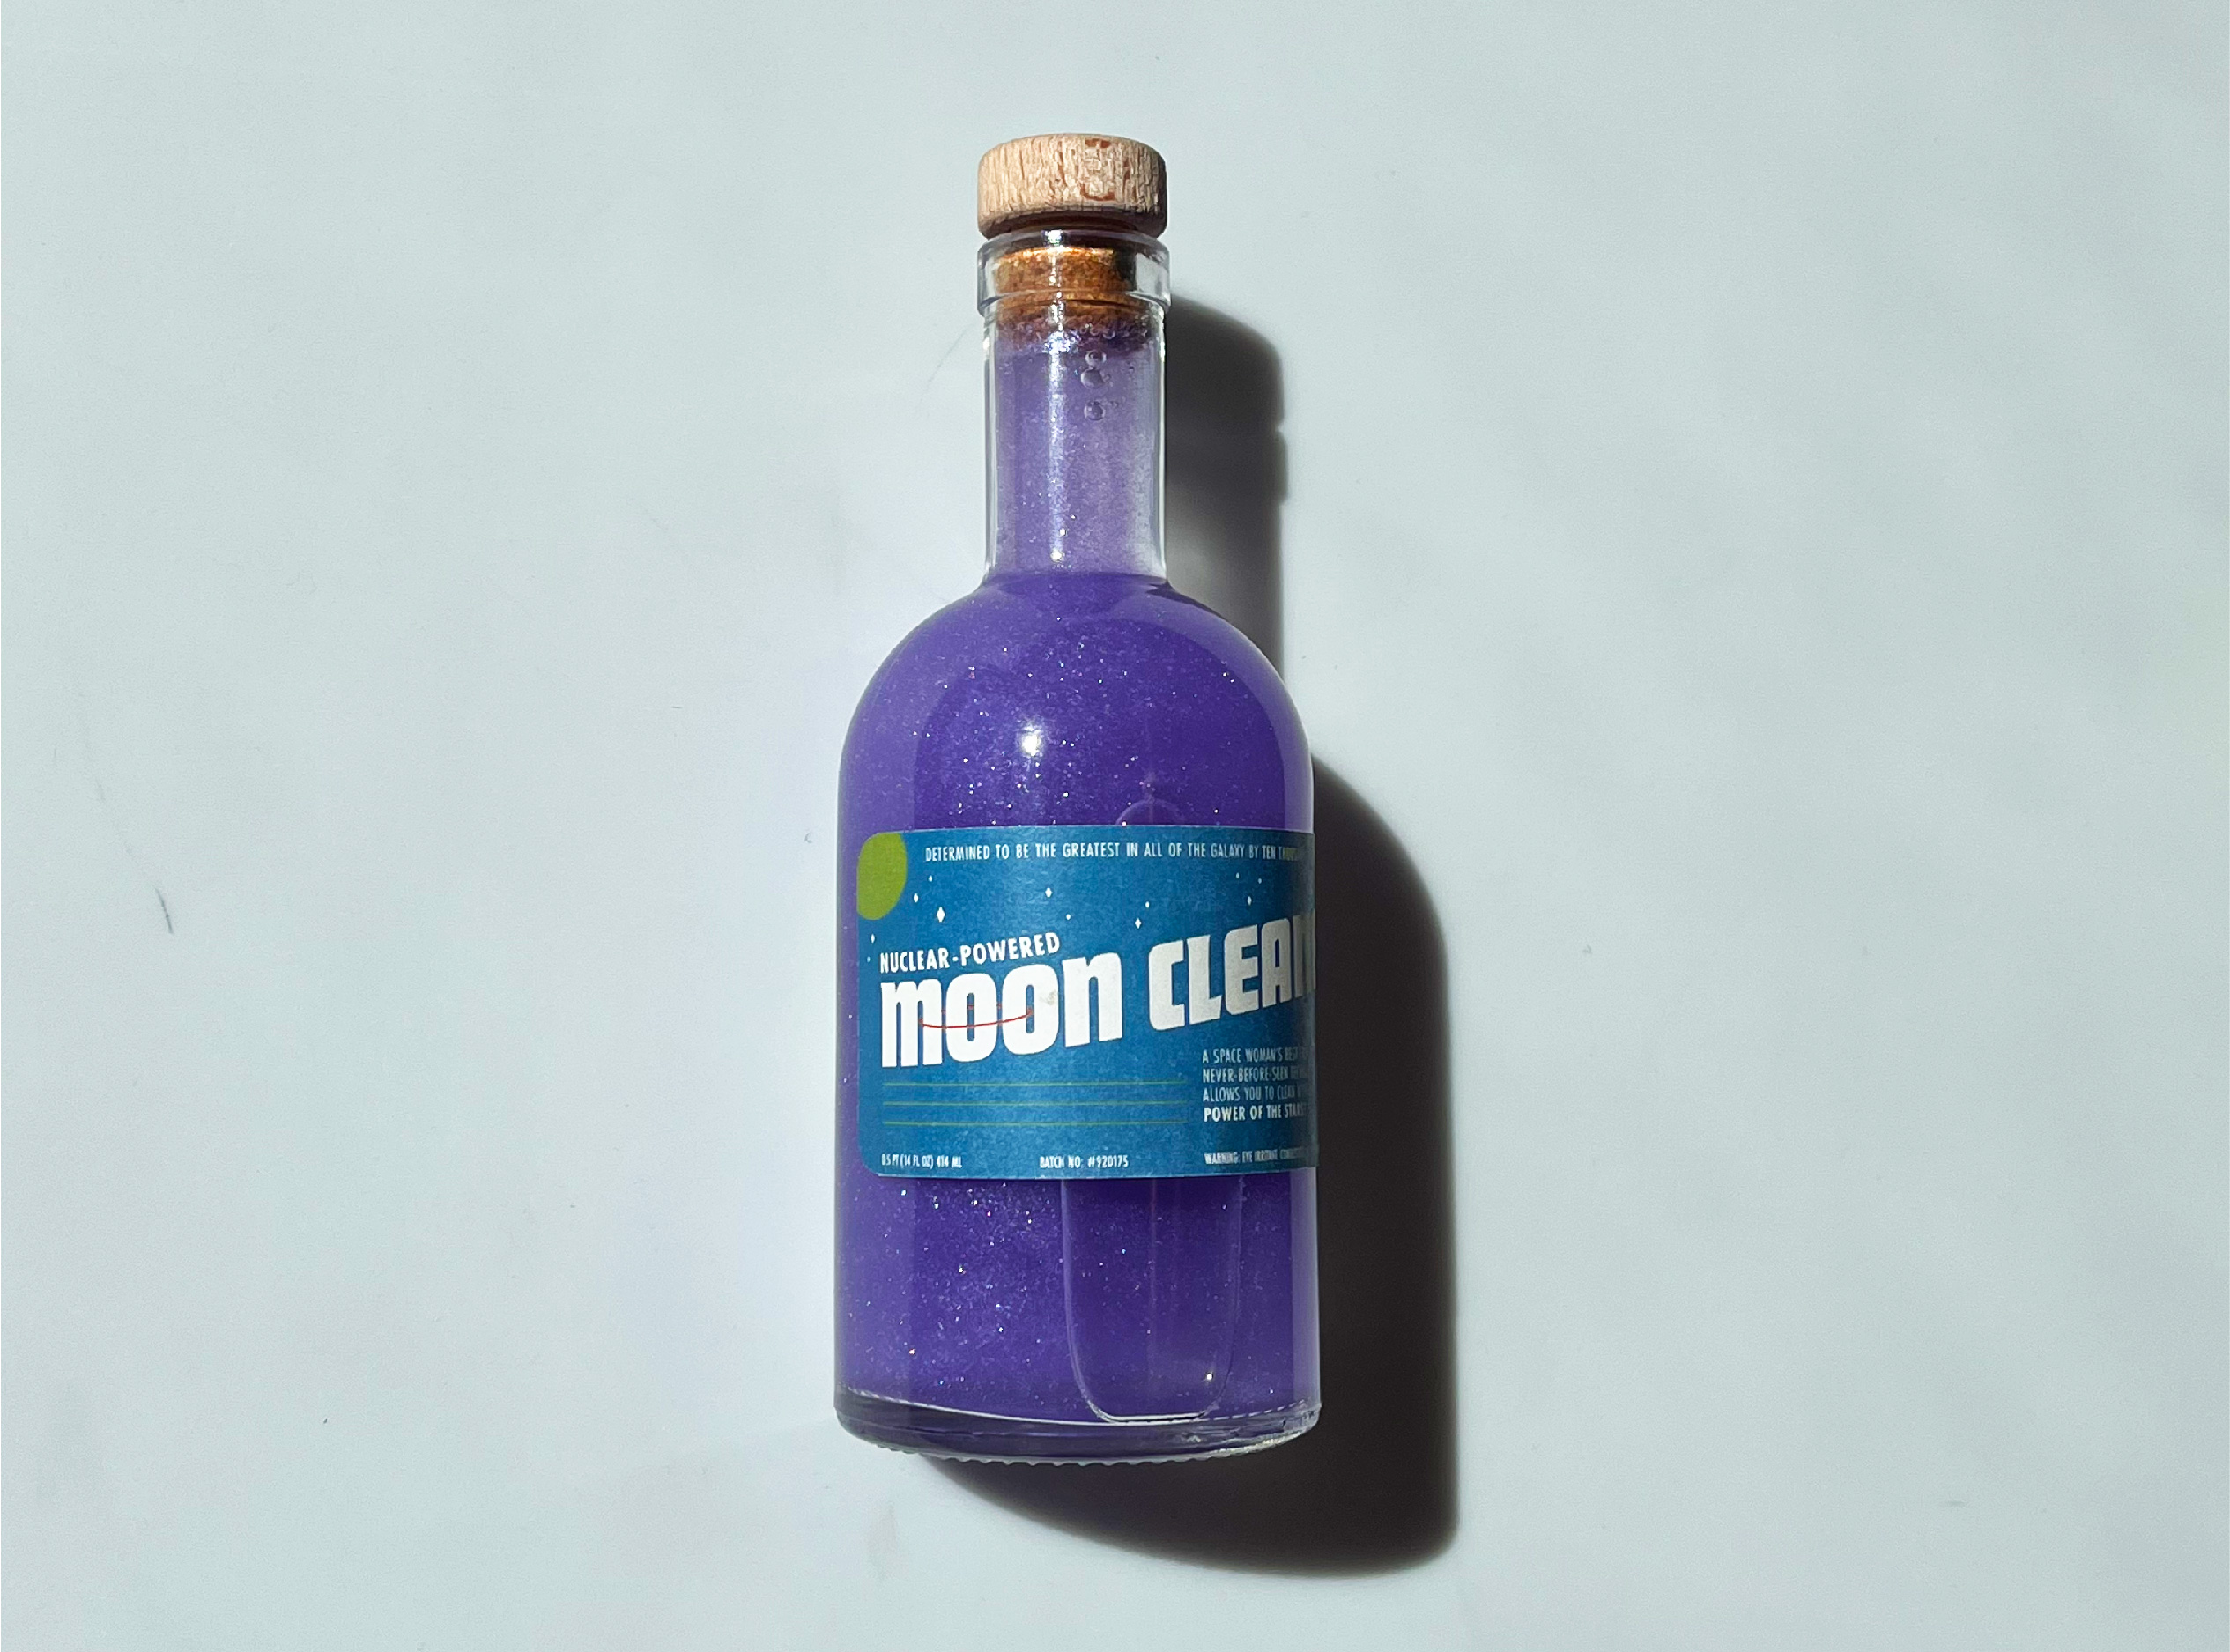 Image of the Moon Cleaner product, which is a space-age style bottle with a cork top and purple glittery liquid inside.